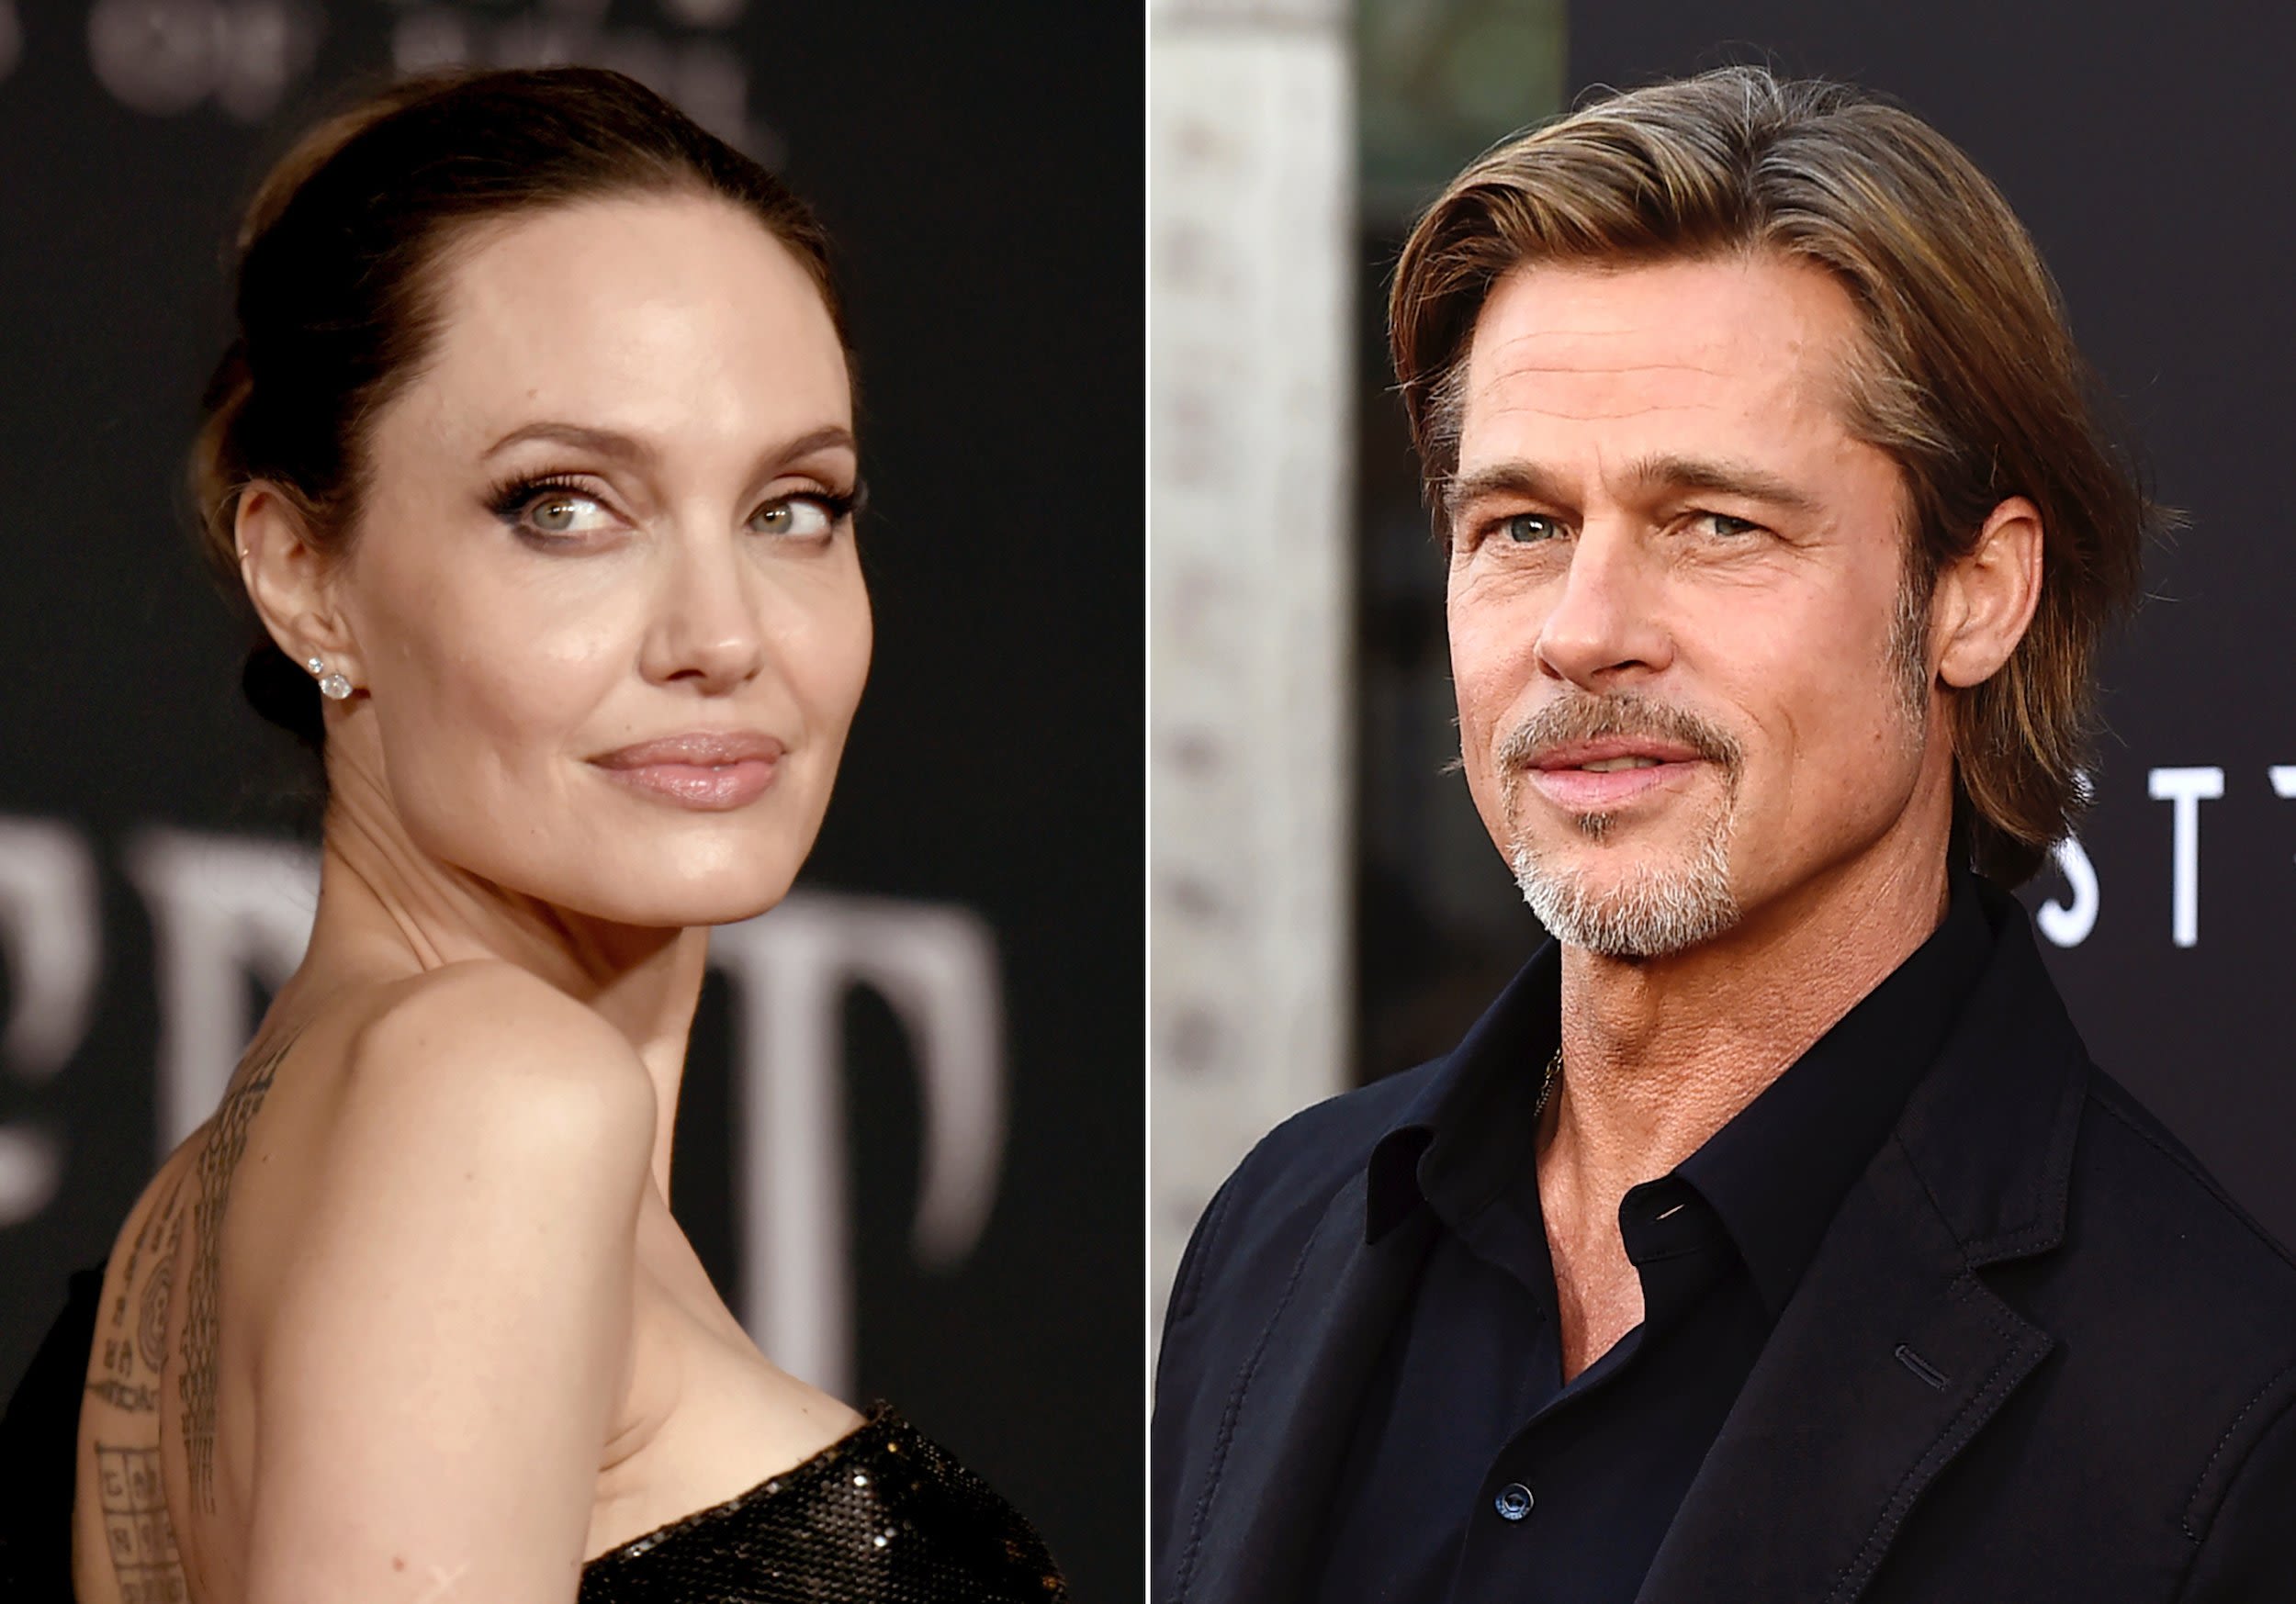 Angelina Jolie could be forced to reveal past NDAs in winery fight with Brad Pitt